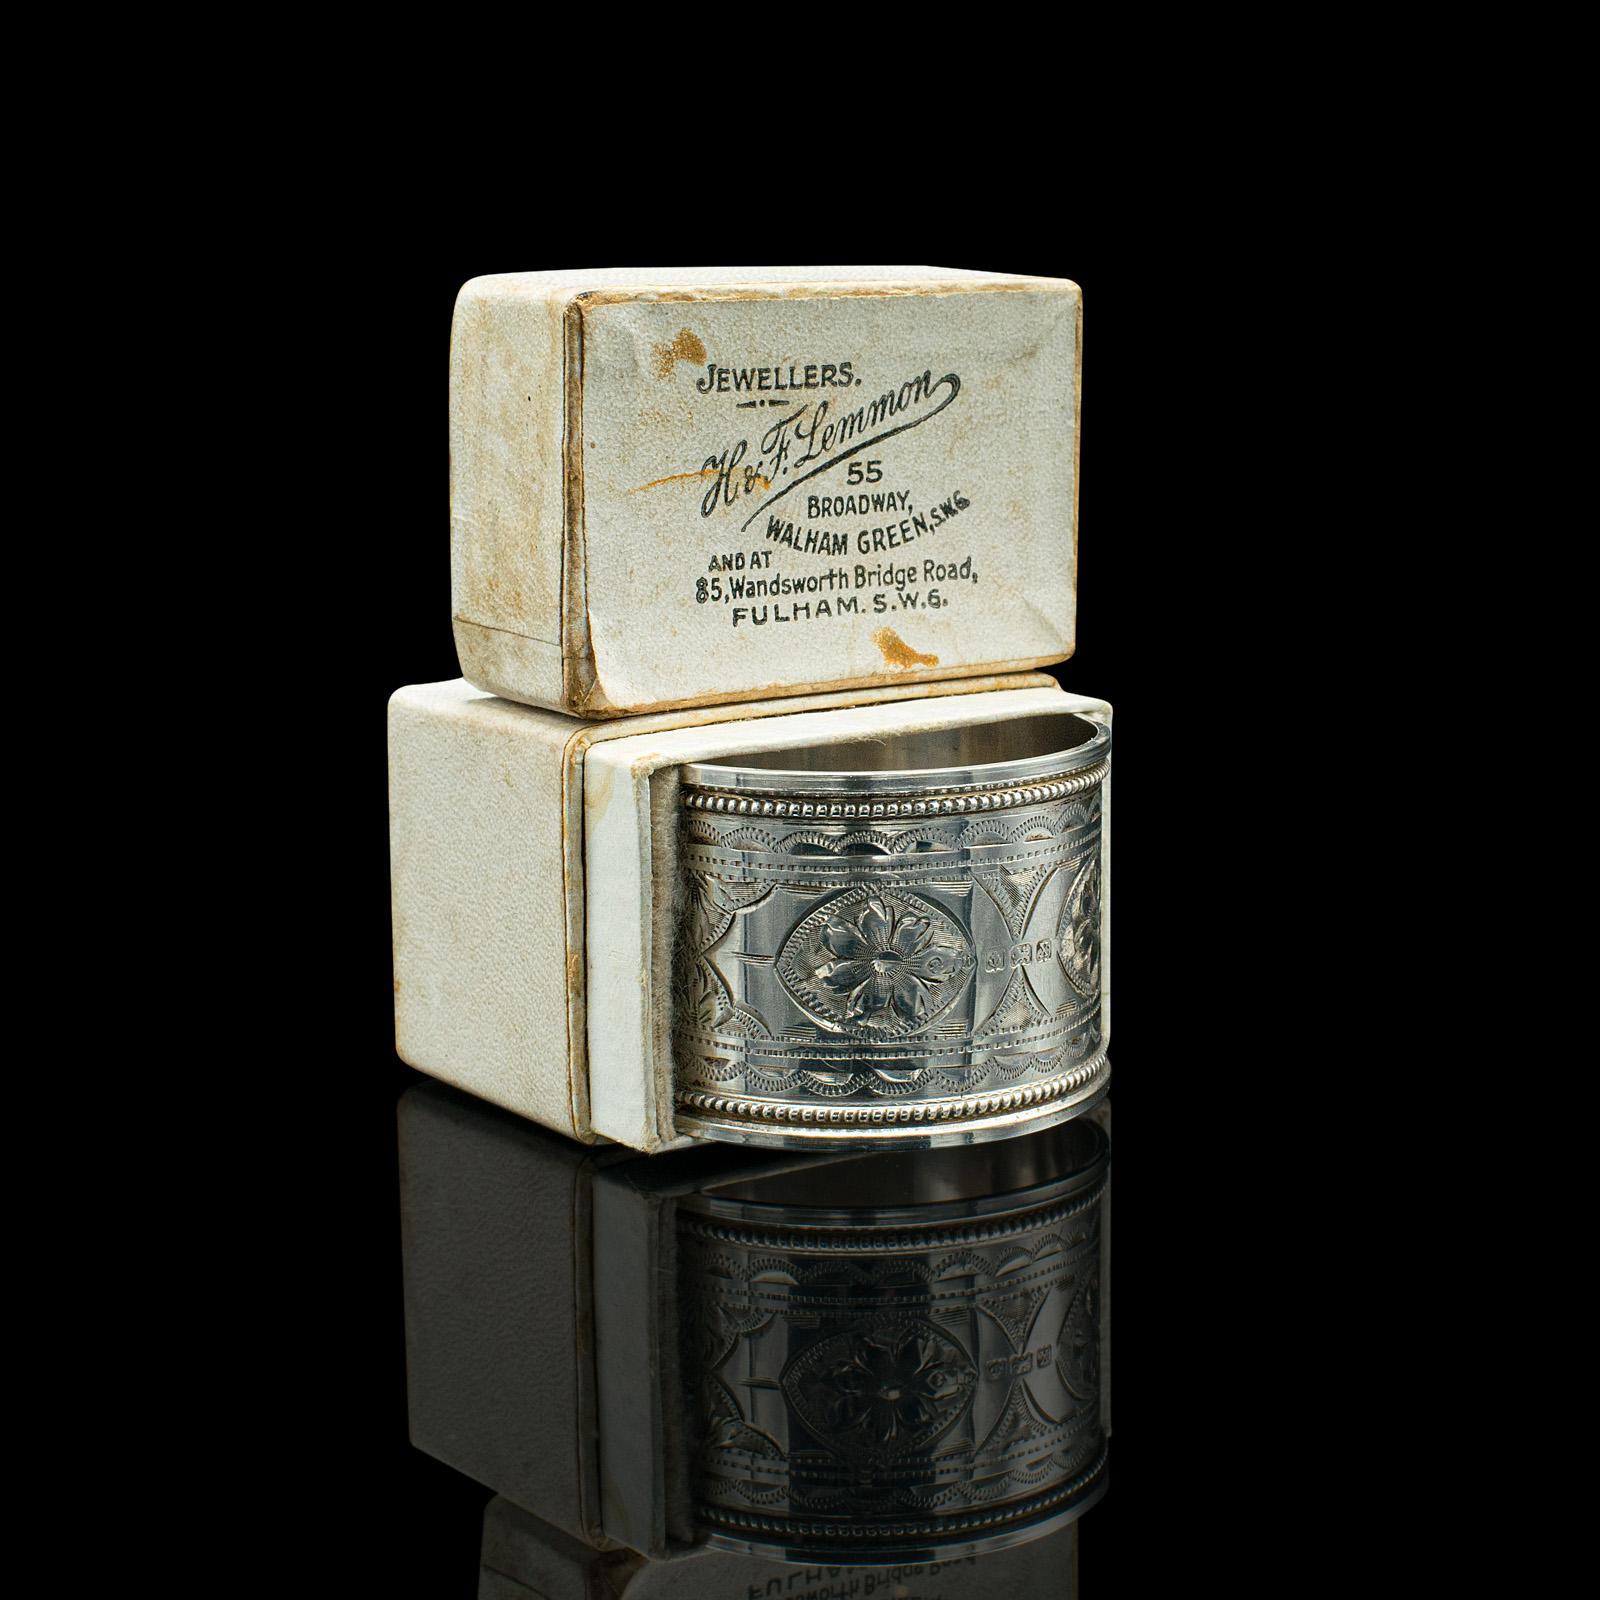 

This is an antique napkin ring. An English, Sterling silver table decoration, hallmarked in Birmingham and dated 1922.

Beautifully presented napkin ring with dealer supplied box
Displays a desirable aged patina with minimal tarnishing
Sterling